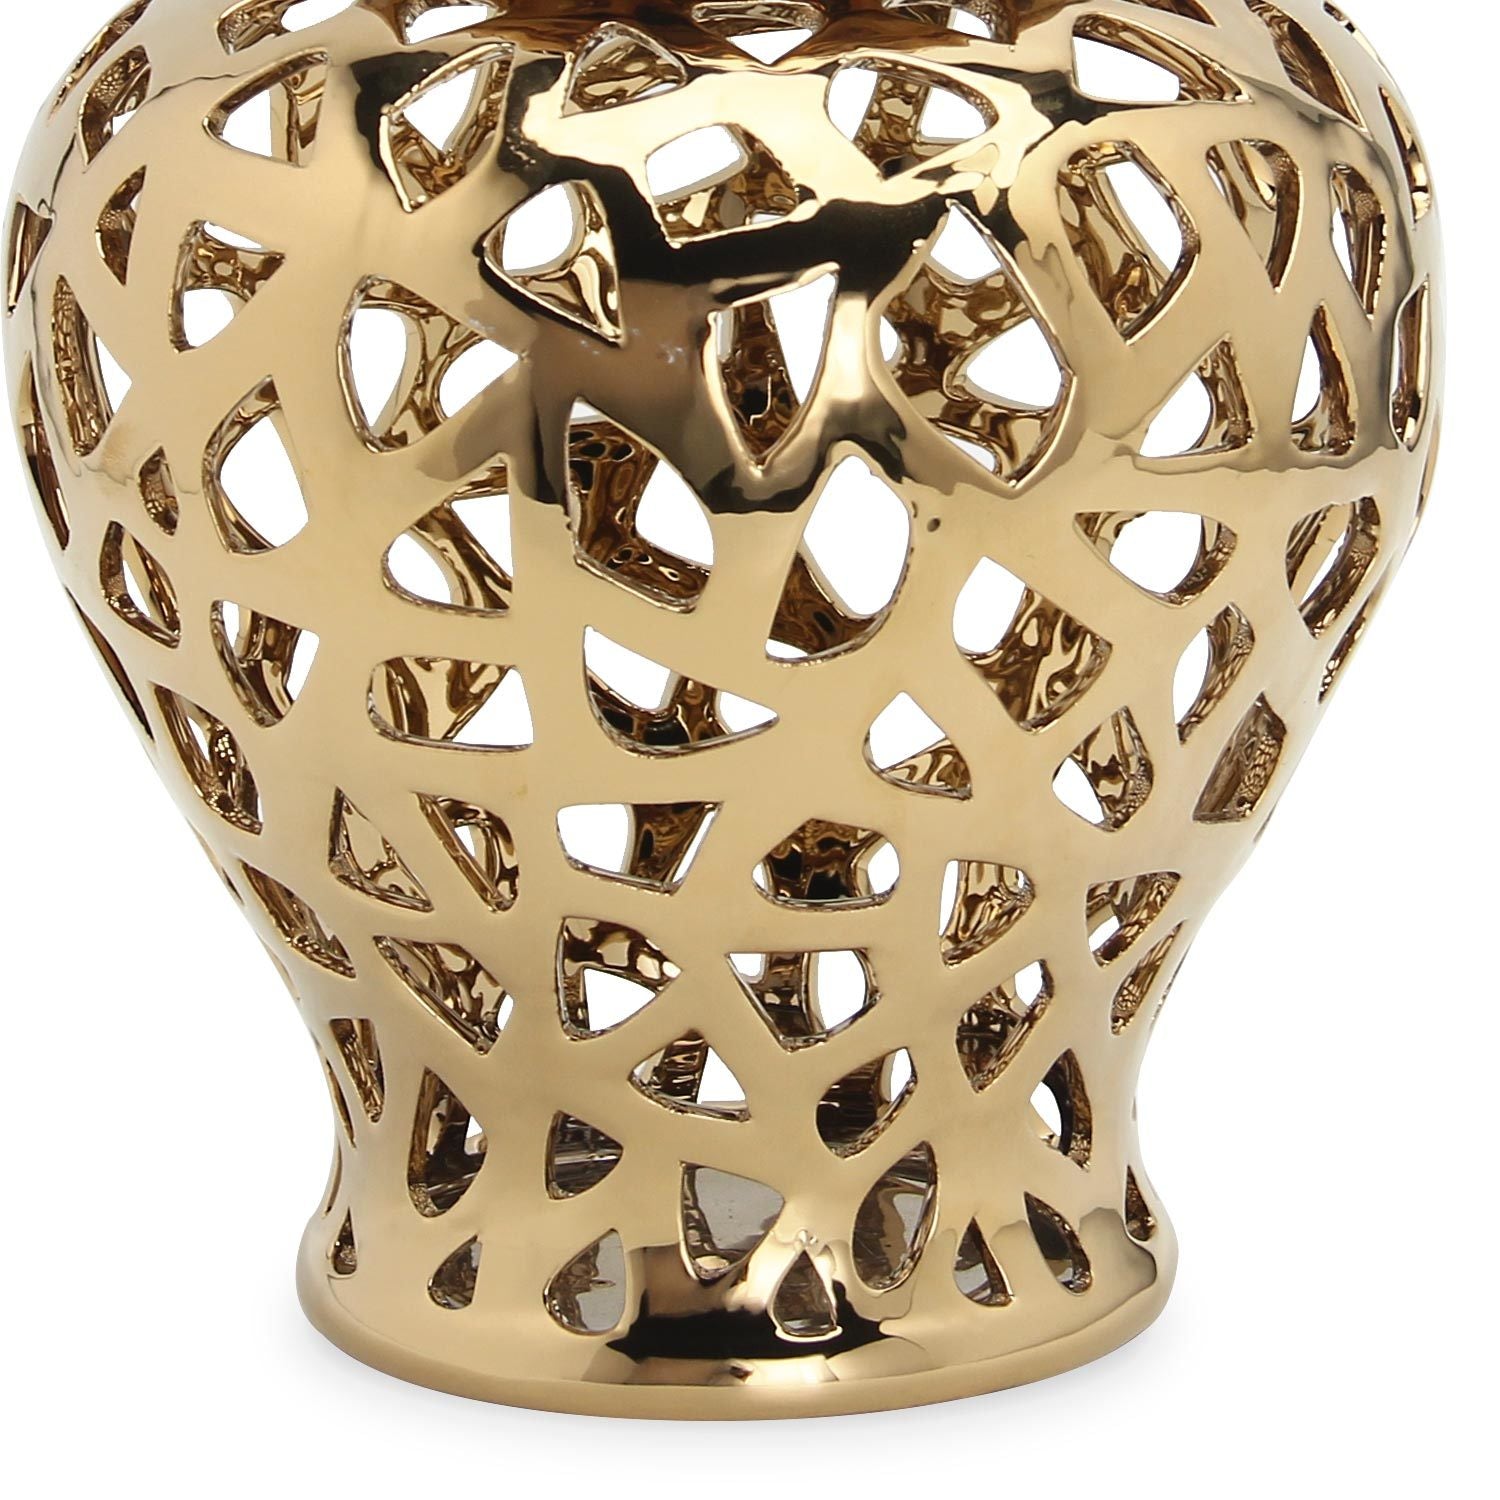 A Gold Ceramic Ginger Jar Vase with Decorative Design with an intricate design.